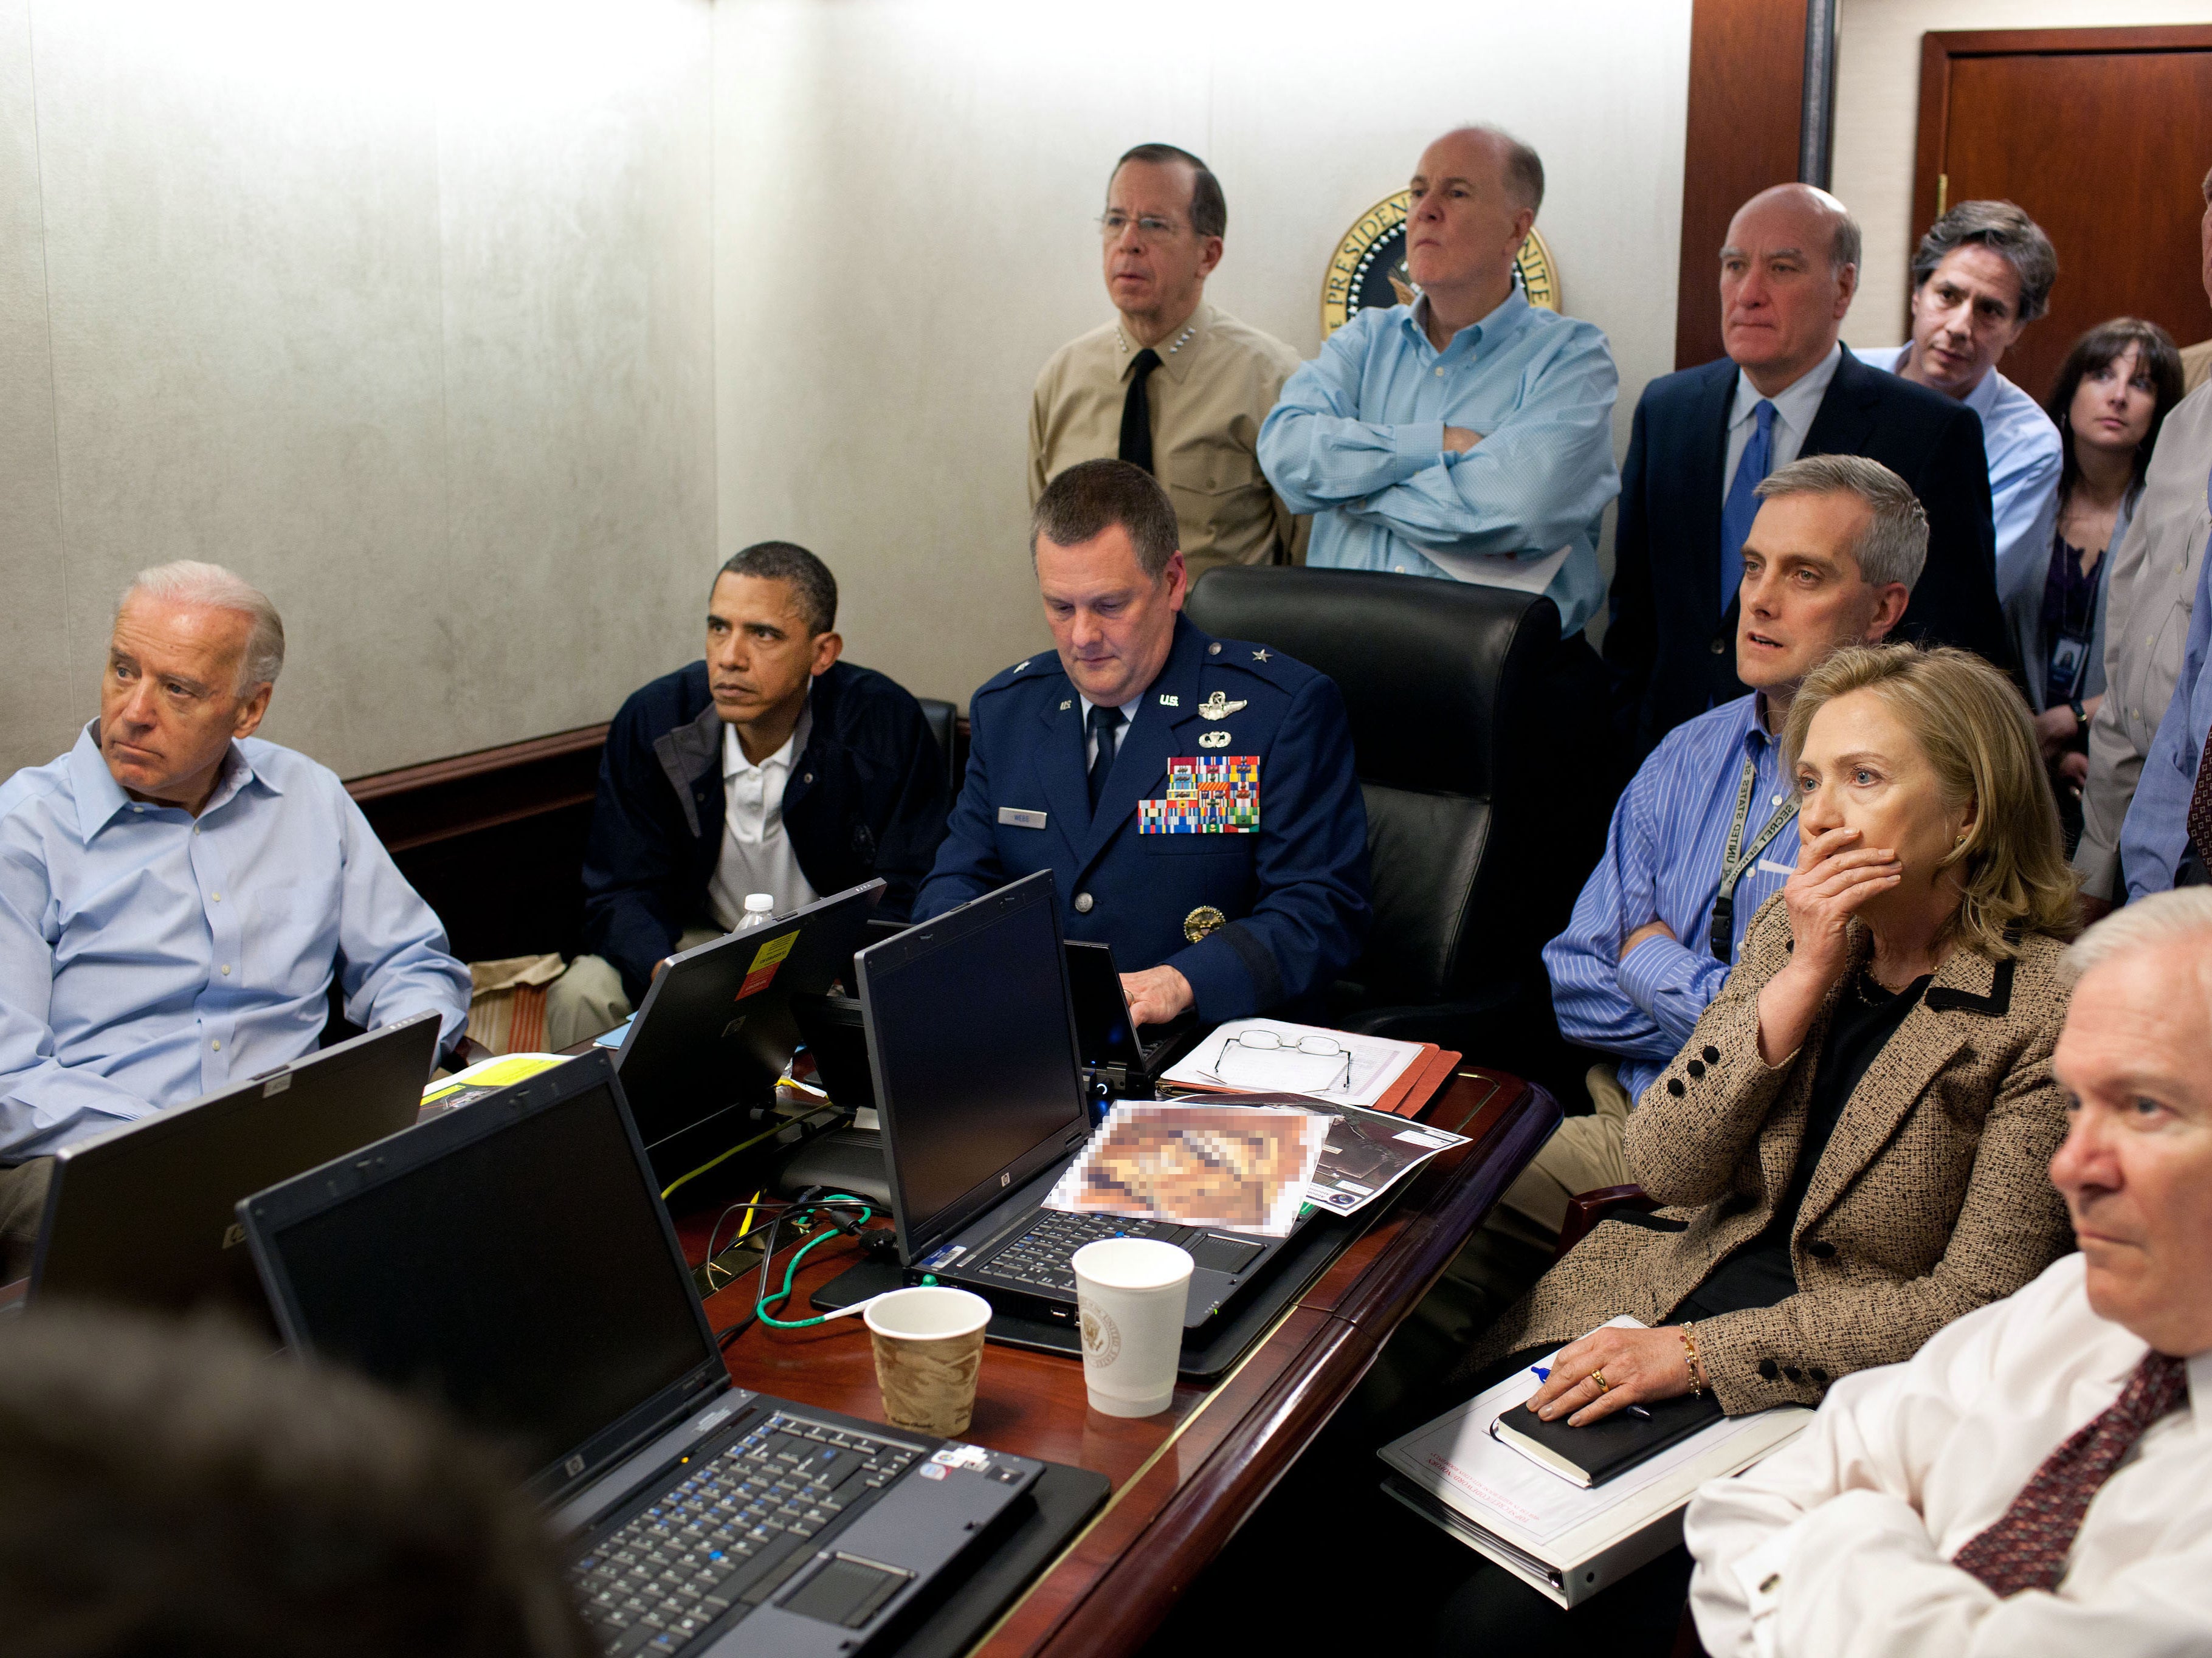 President Barack Obama, vice president Joe Biden, secretary of state Hillary Clinton and members of the national security team receive an update on the mission against Osama bin Laden in the Situation Room of the White House on 1 May 2011 in Washington, DC